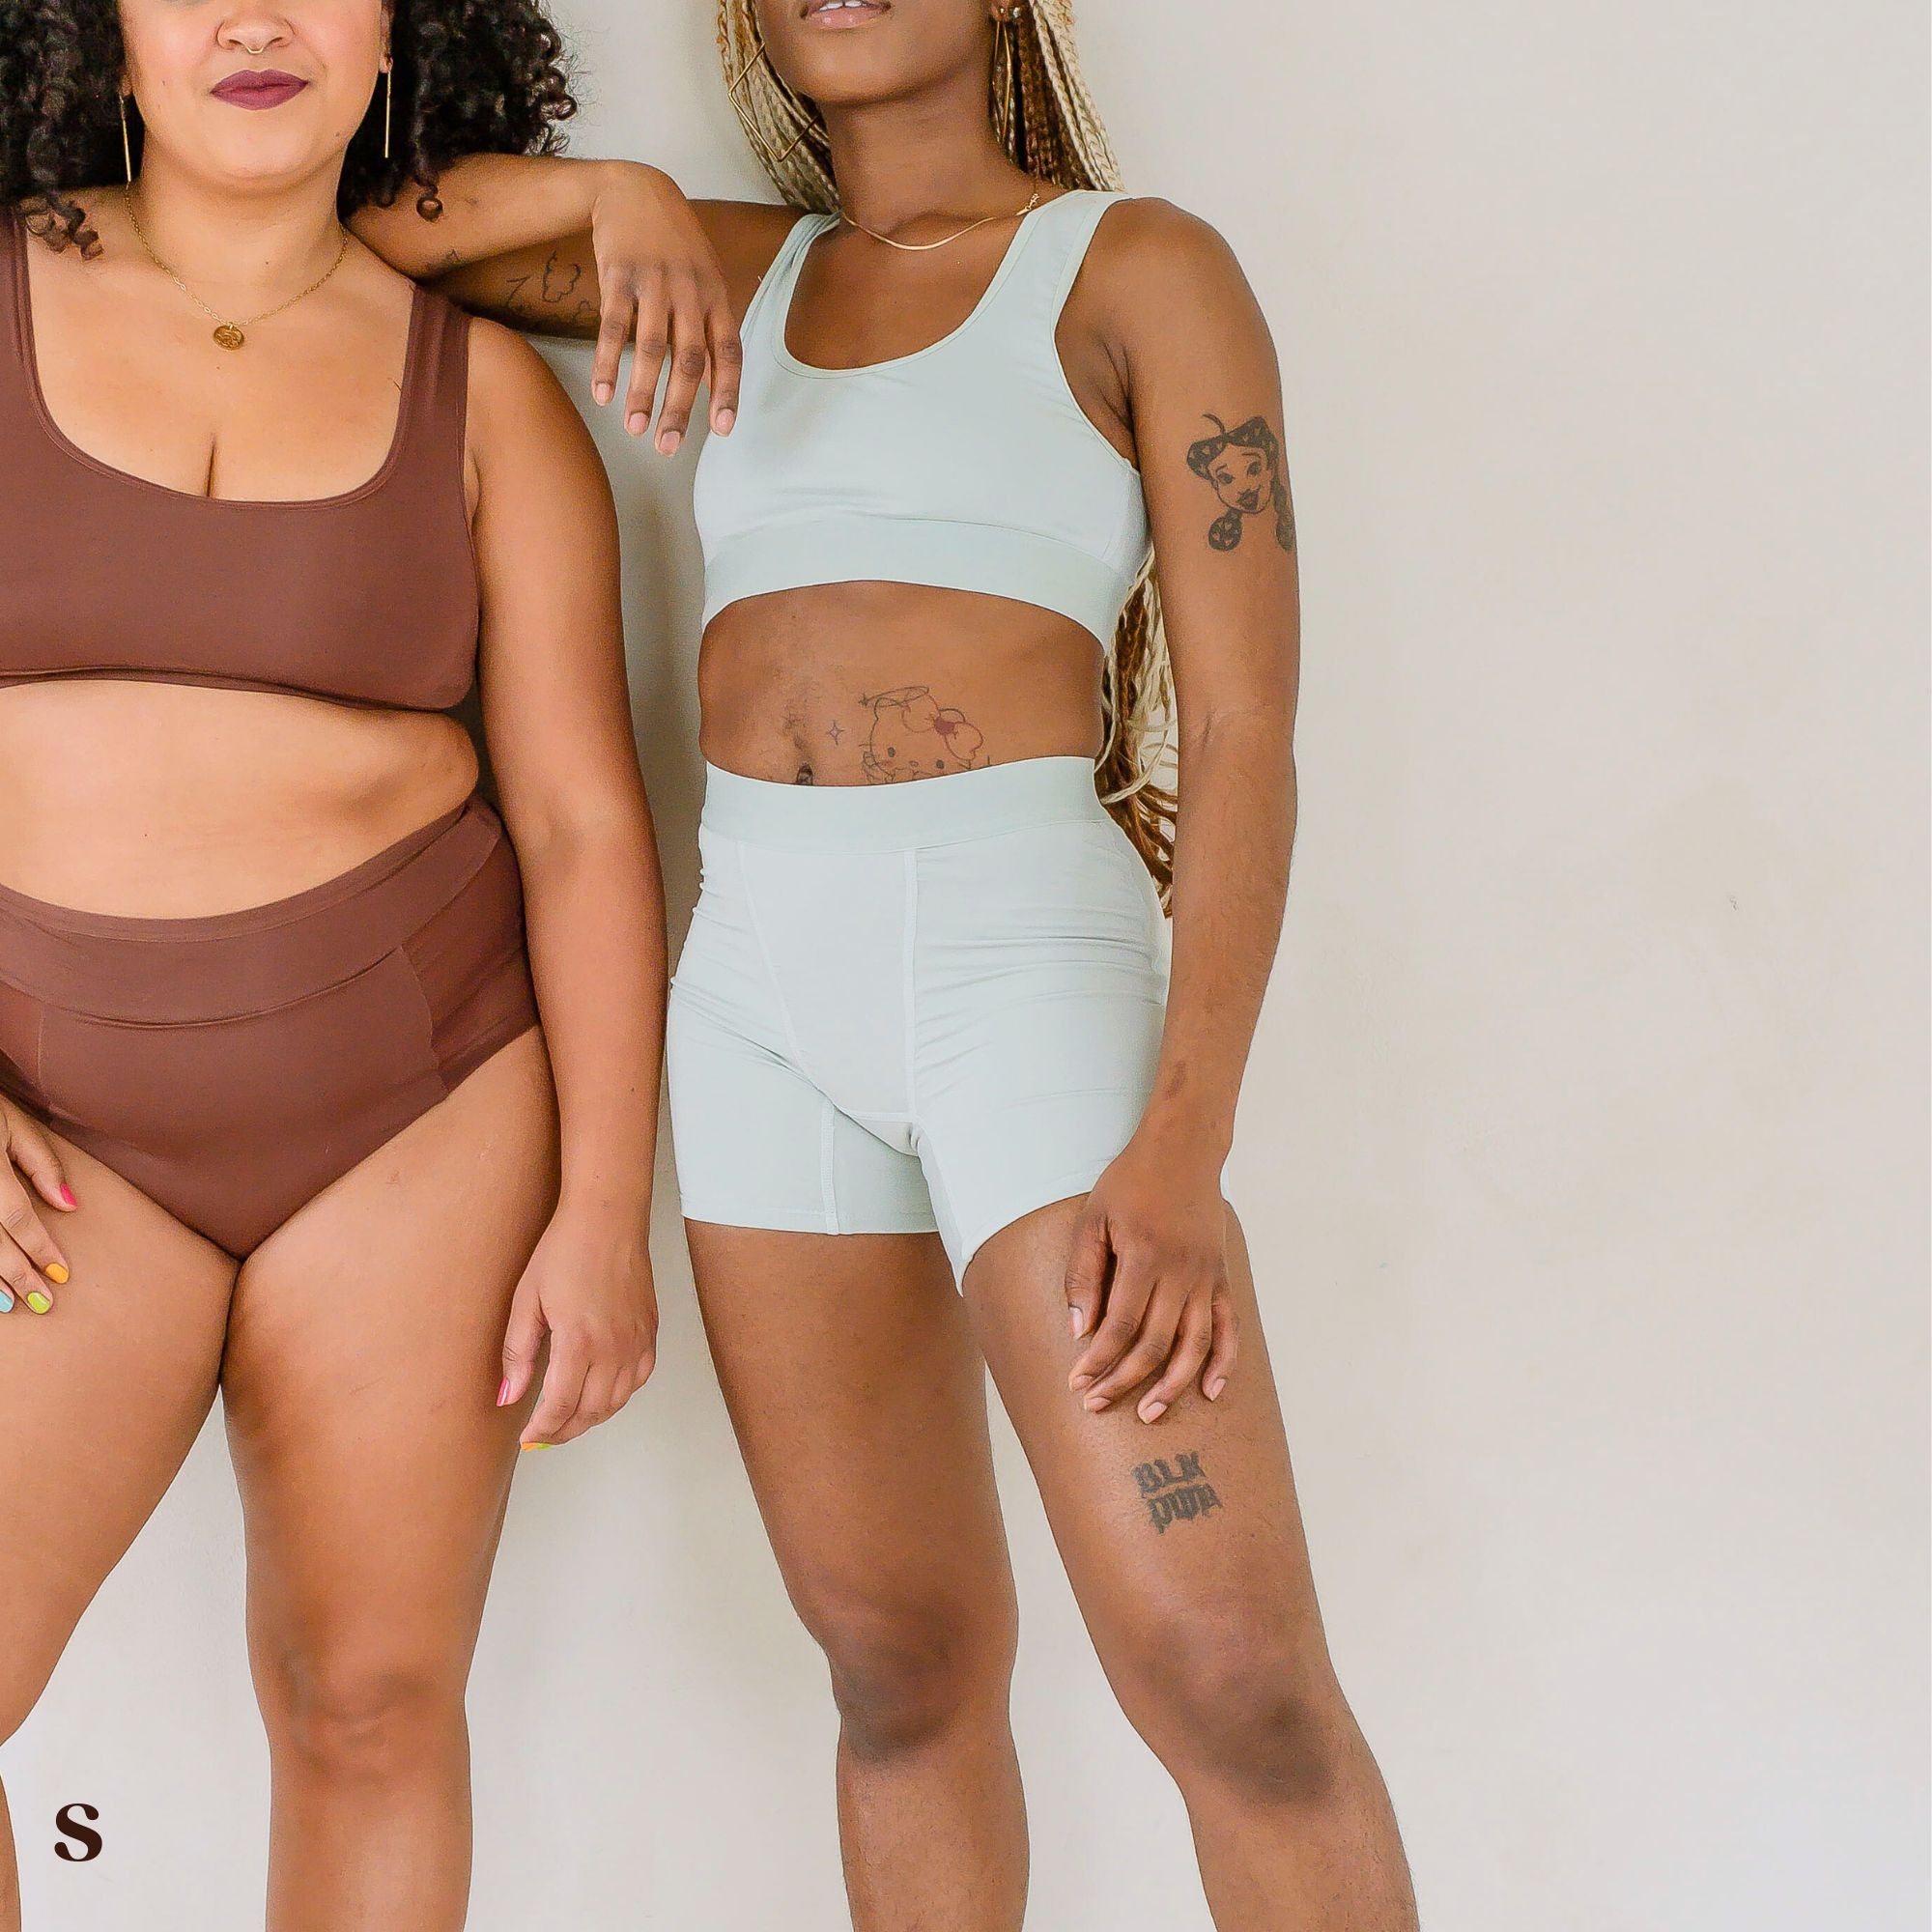 Size Chart: Revol Cares – Society Lingerie